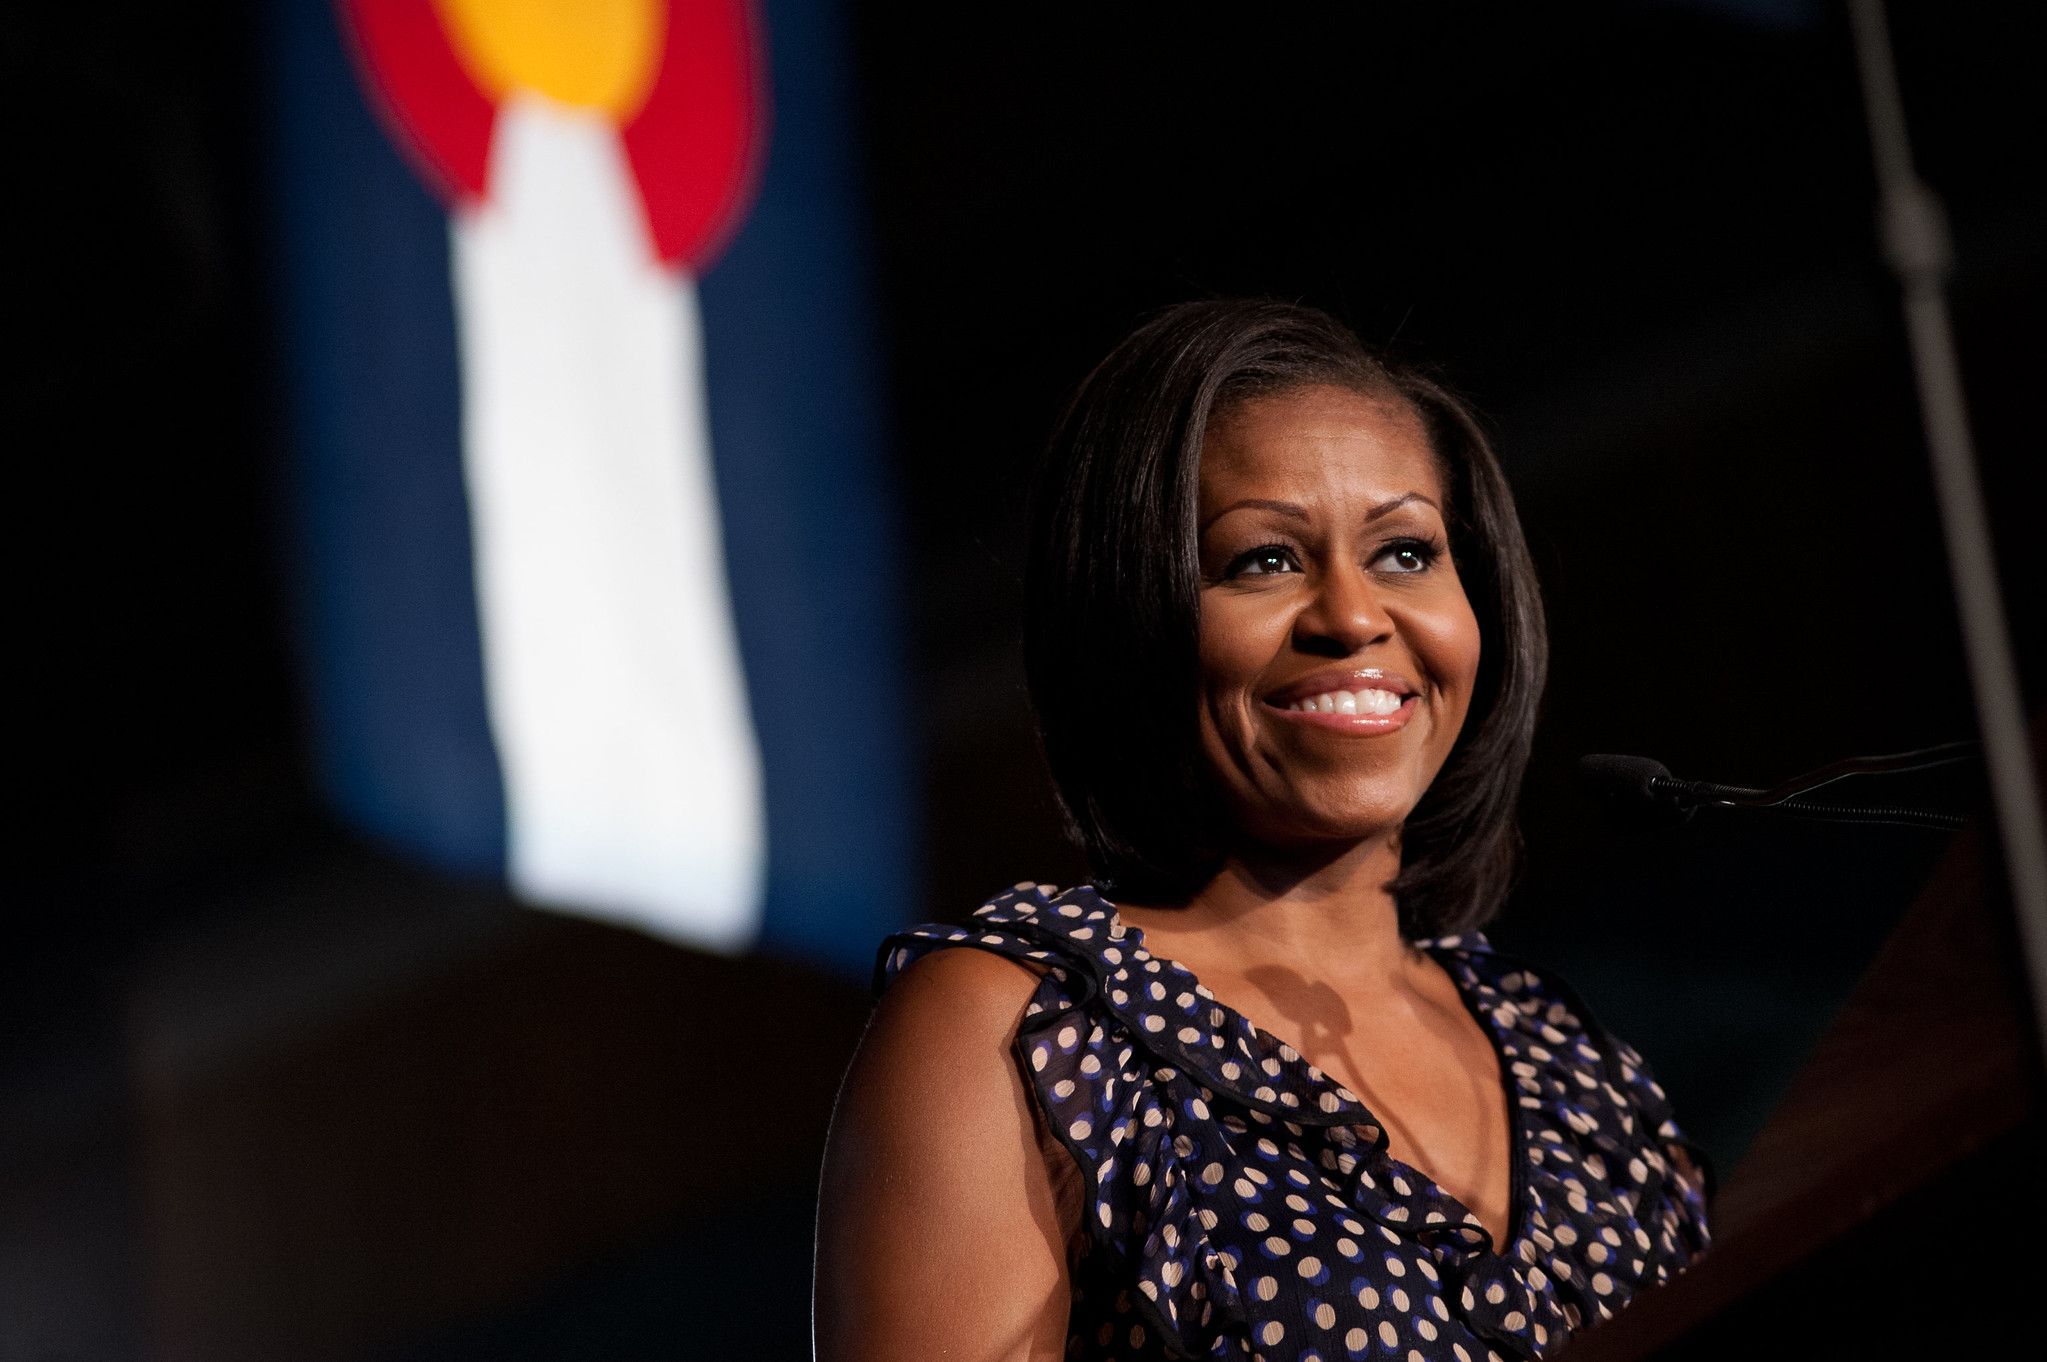 Michelle Obama is a powerhouse inspiring young people around the world